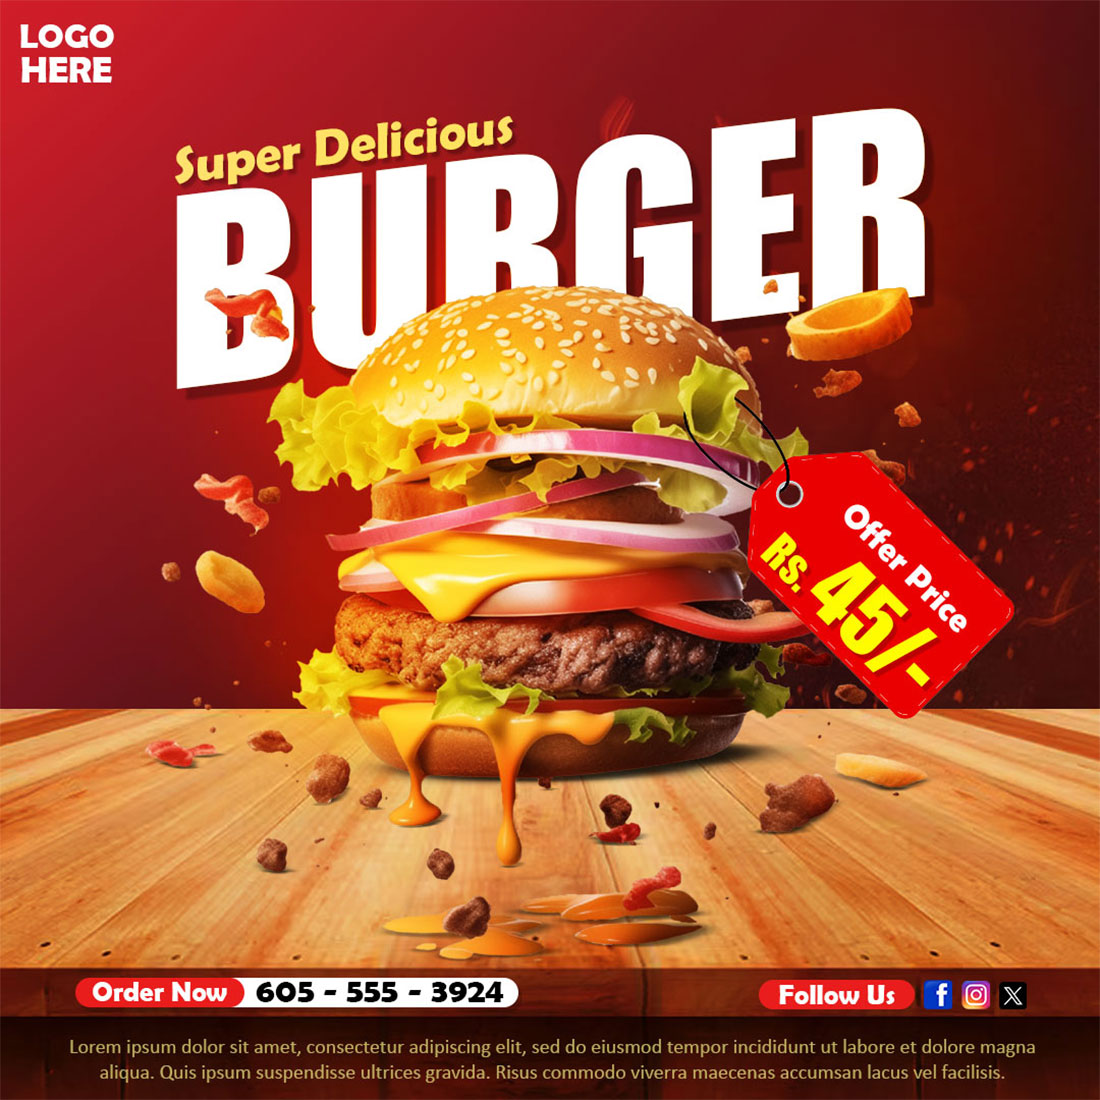 Super Delicious burger and food menu social media banner or Instagram post template preview image.